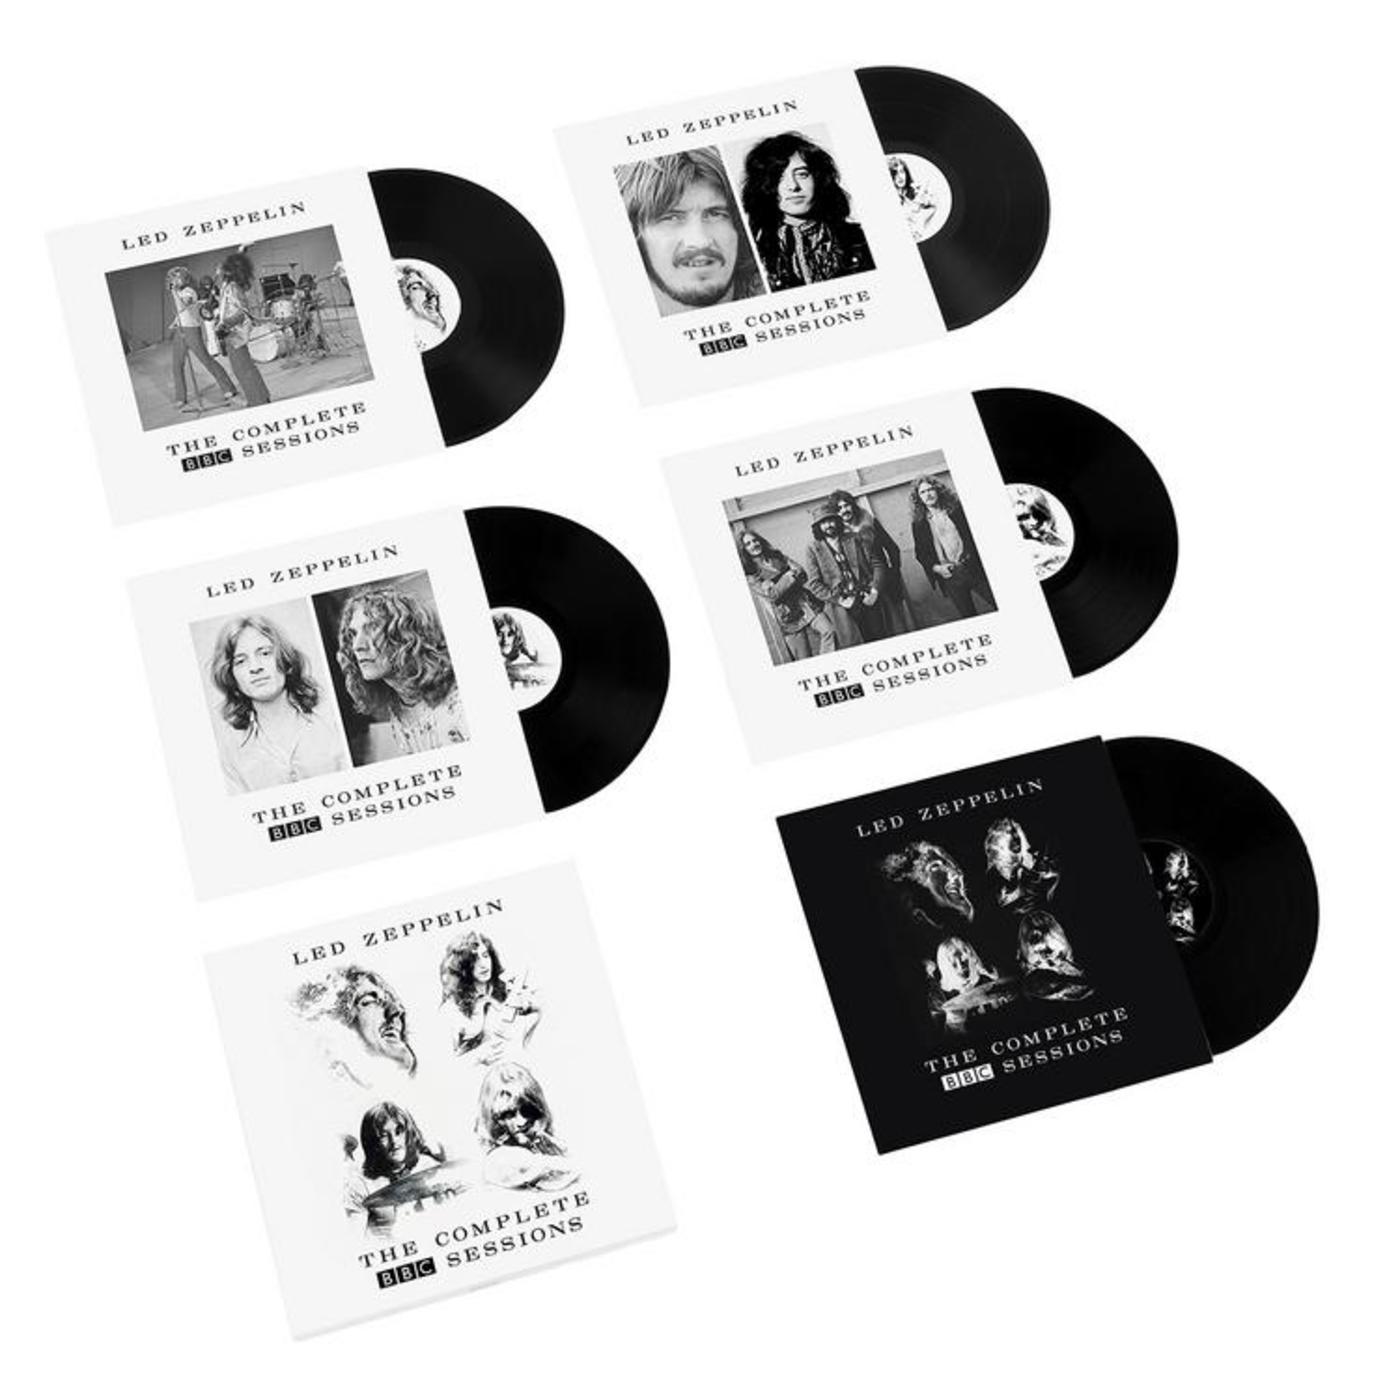 COMPLETE BBC SESSIONS - Deluxe Edition Vinyl